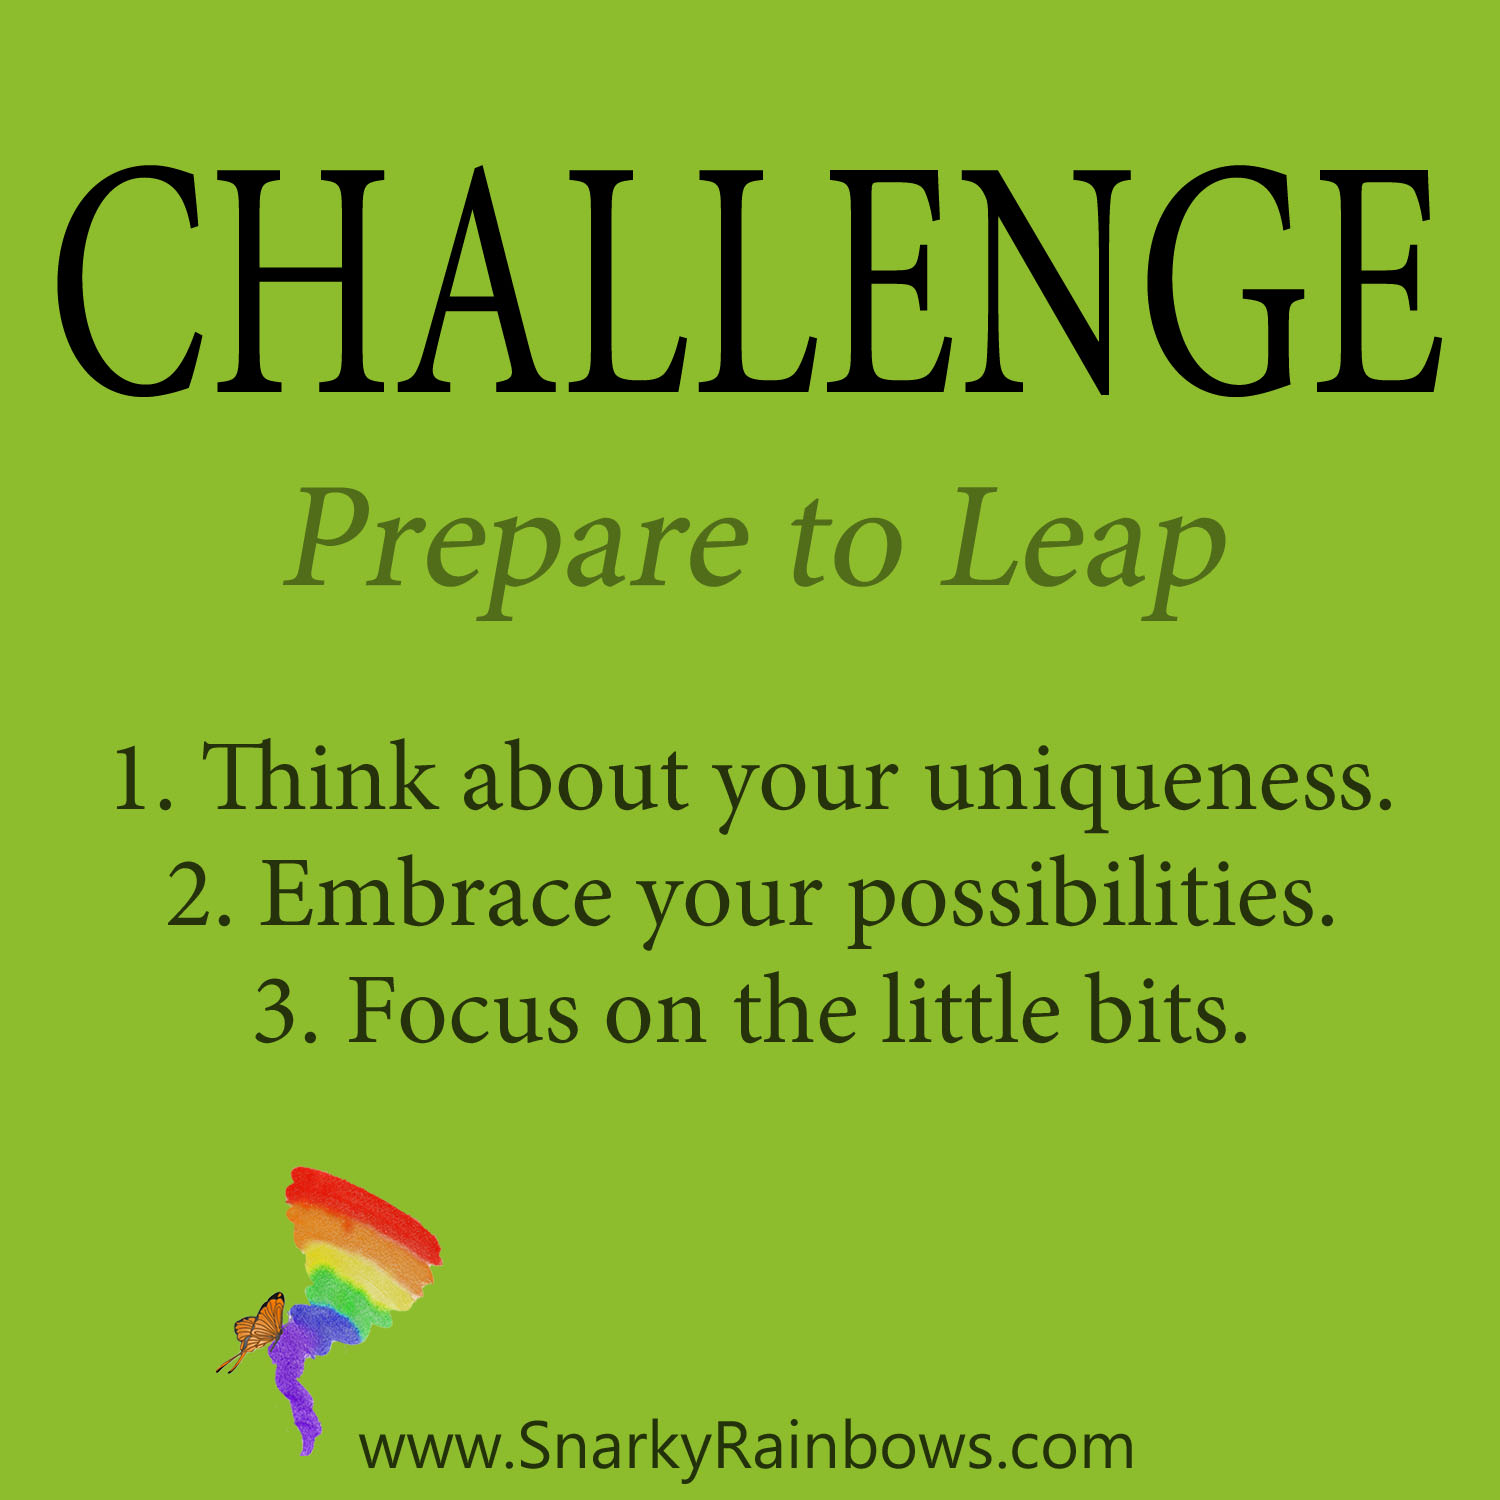 Daily Challenge - prepare to Leap